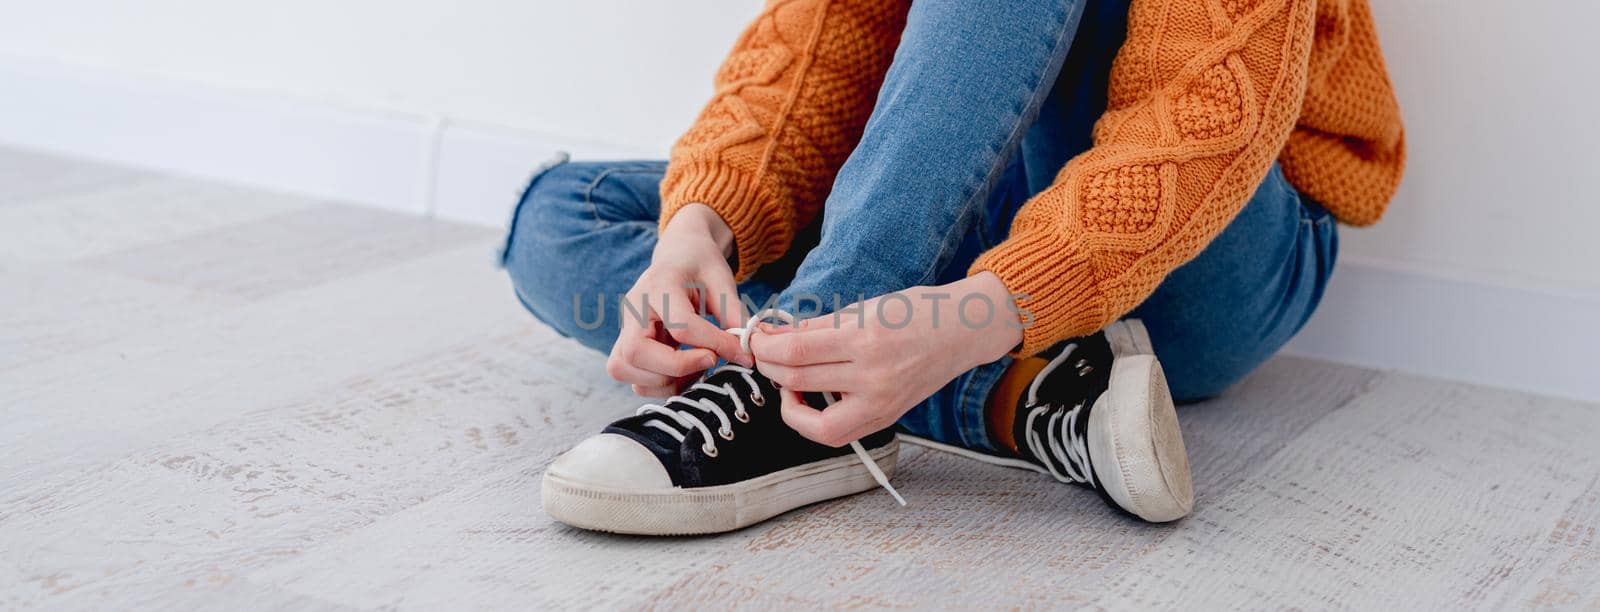 Little girl tying shoelace on sneakers while sitting on floor at home